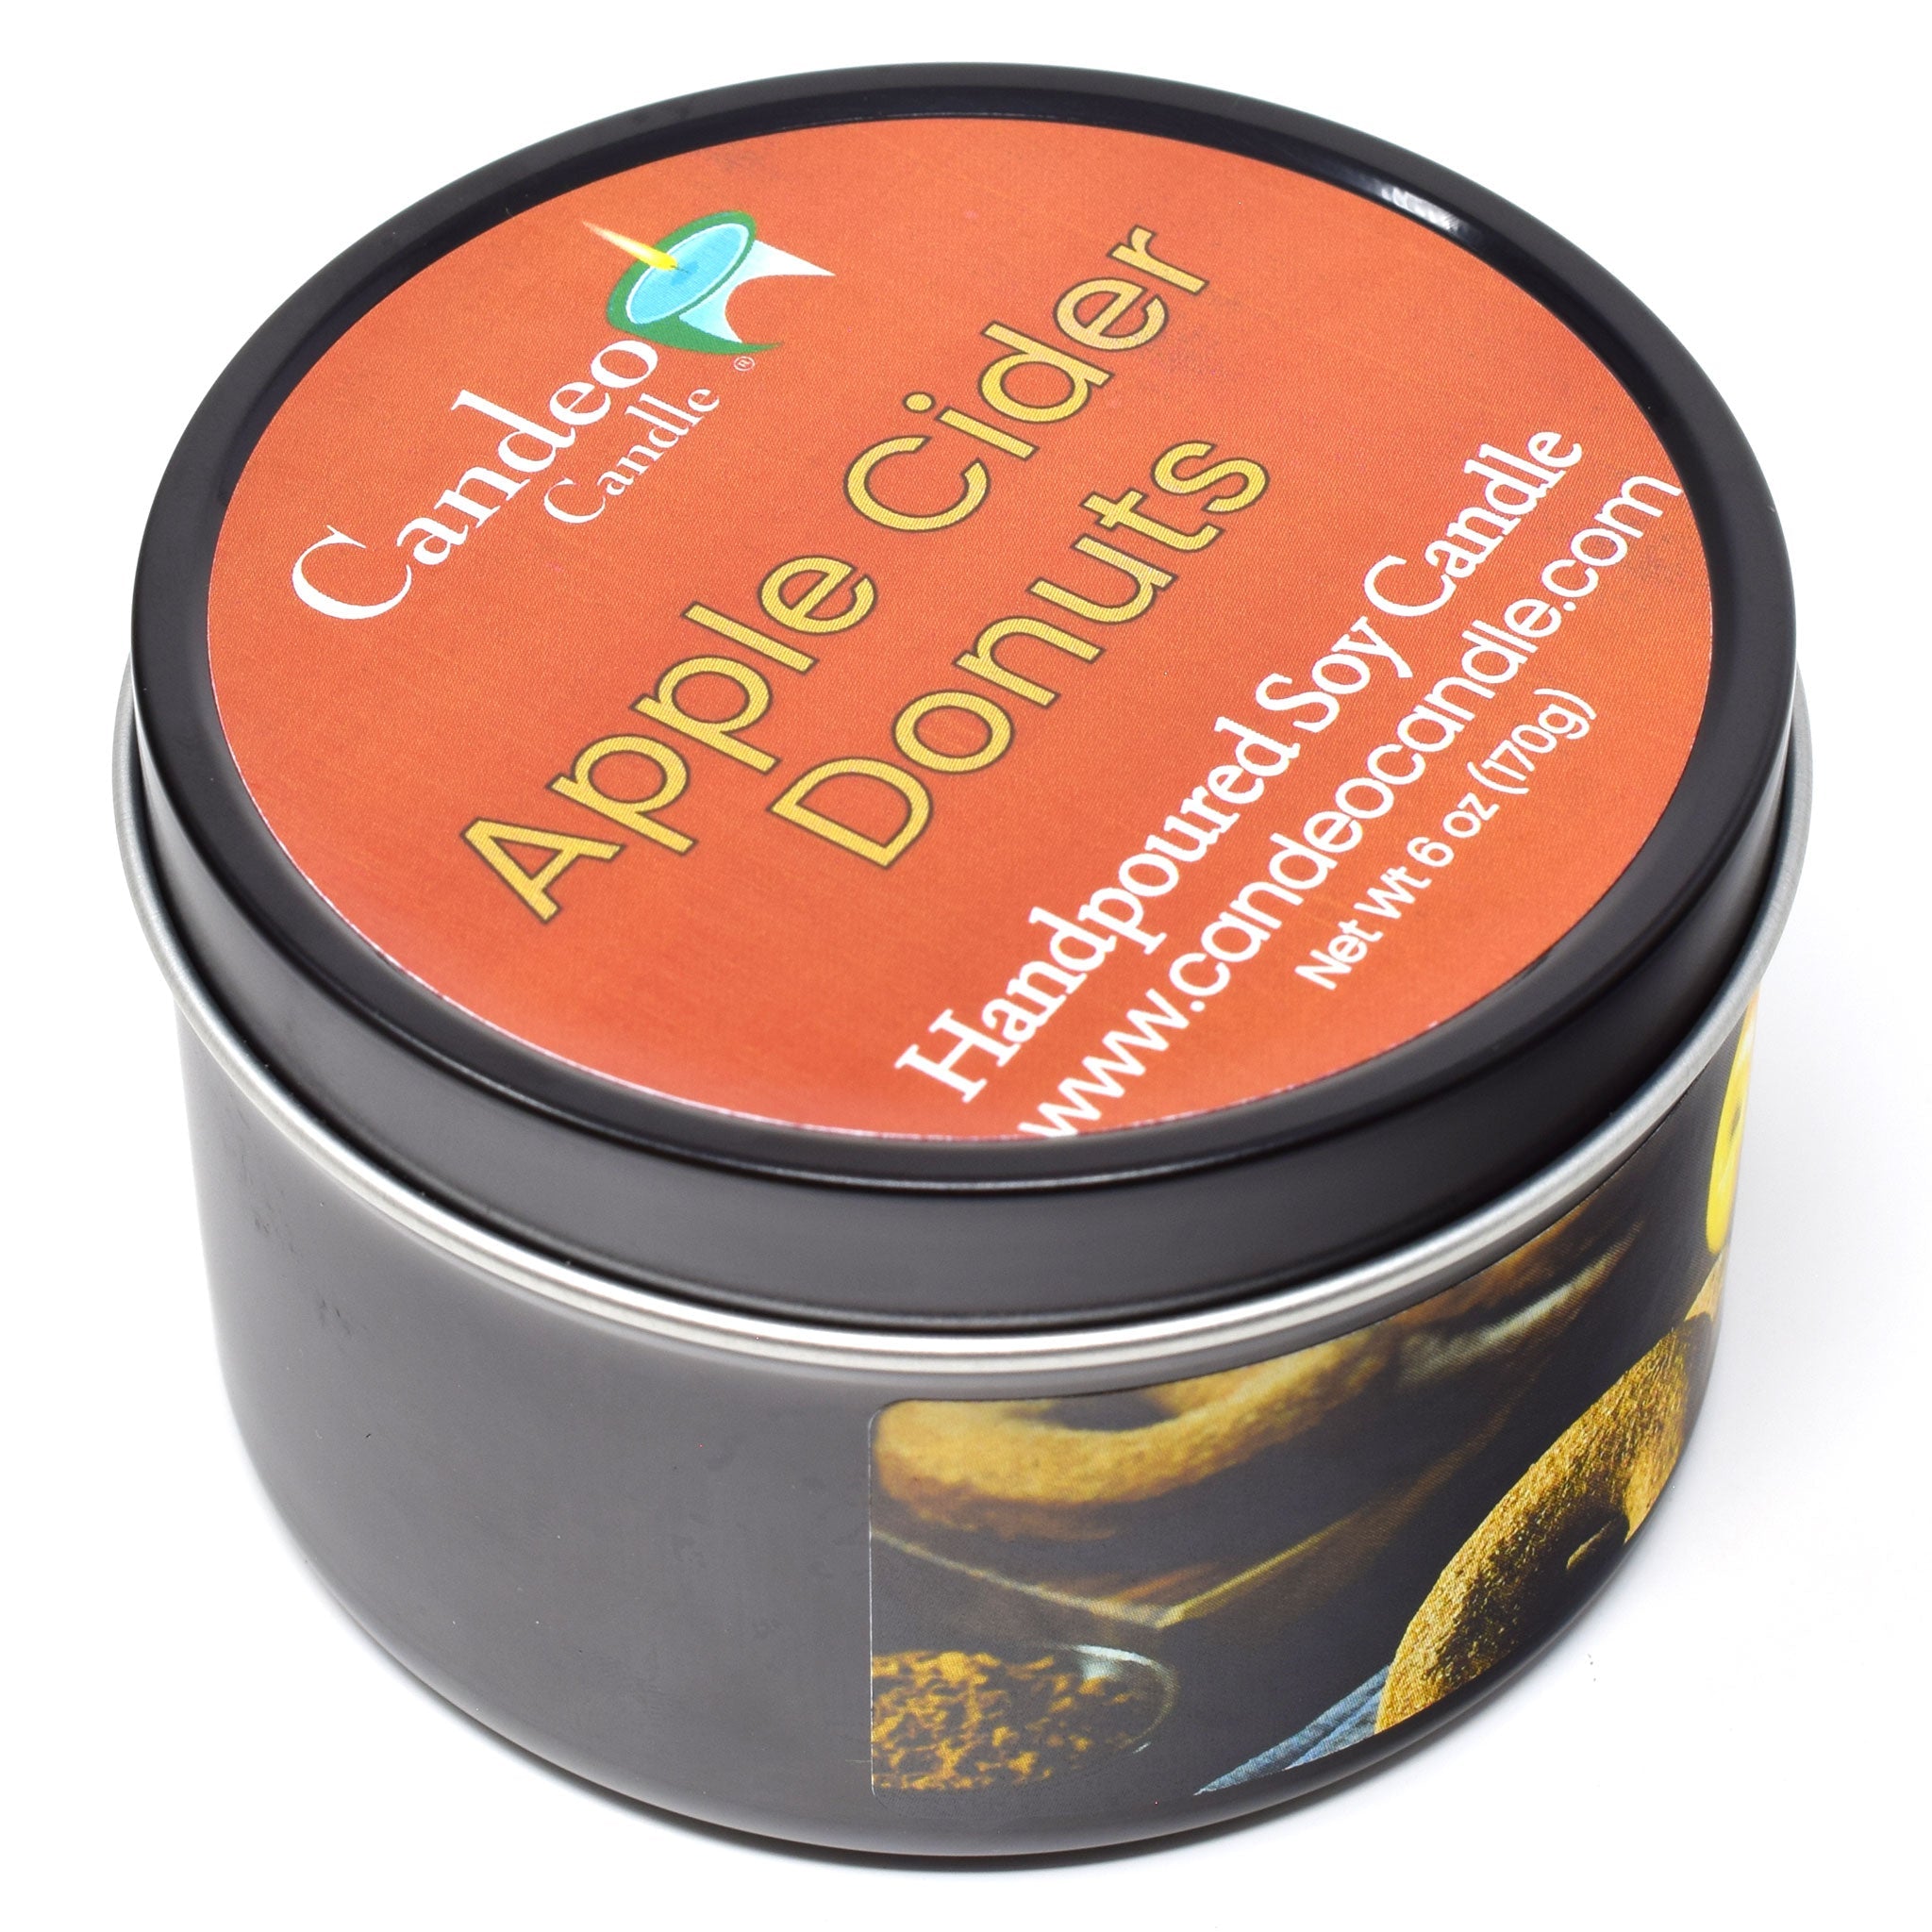 Apple Cider Donuts, 6oz Soy Candle Tin - Candeo Candle